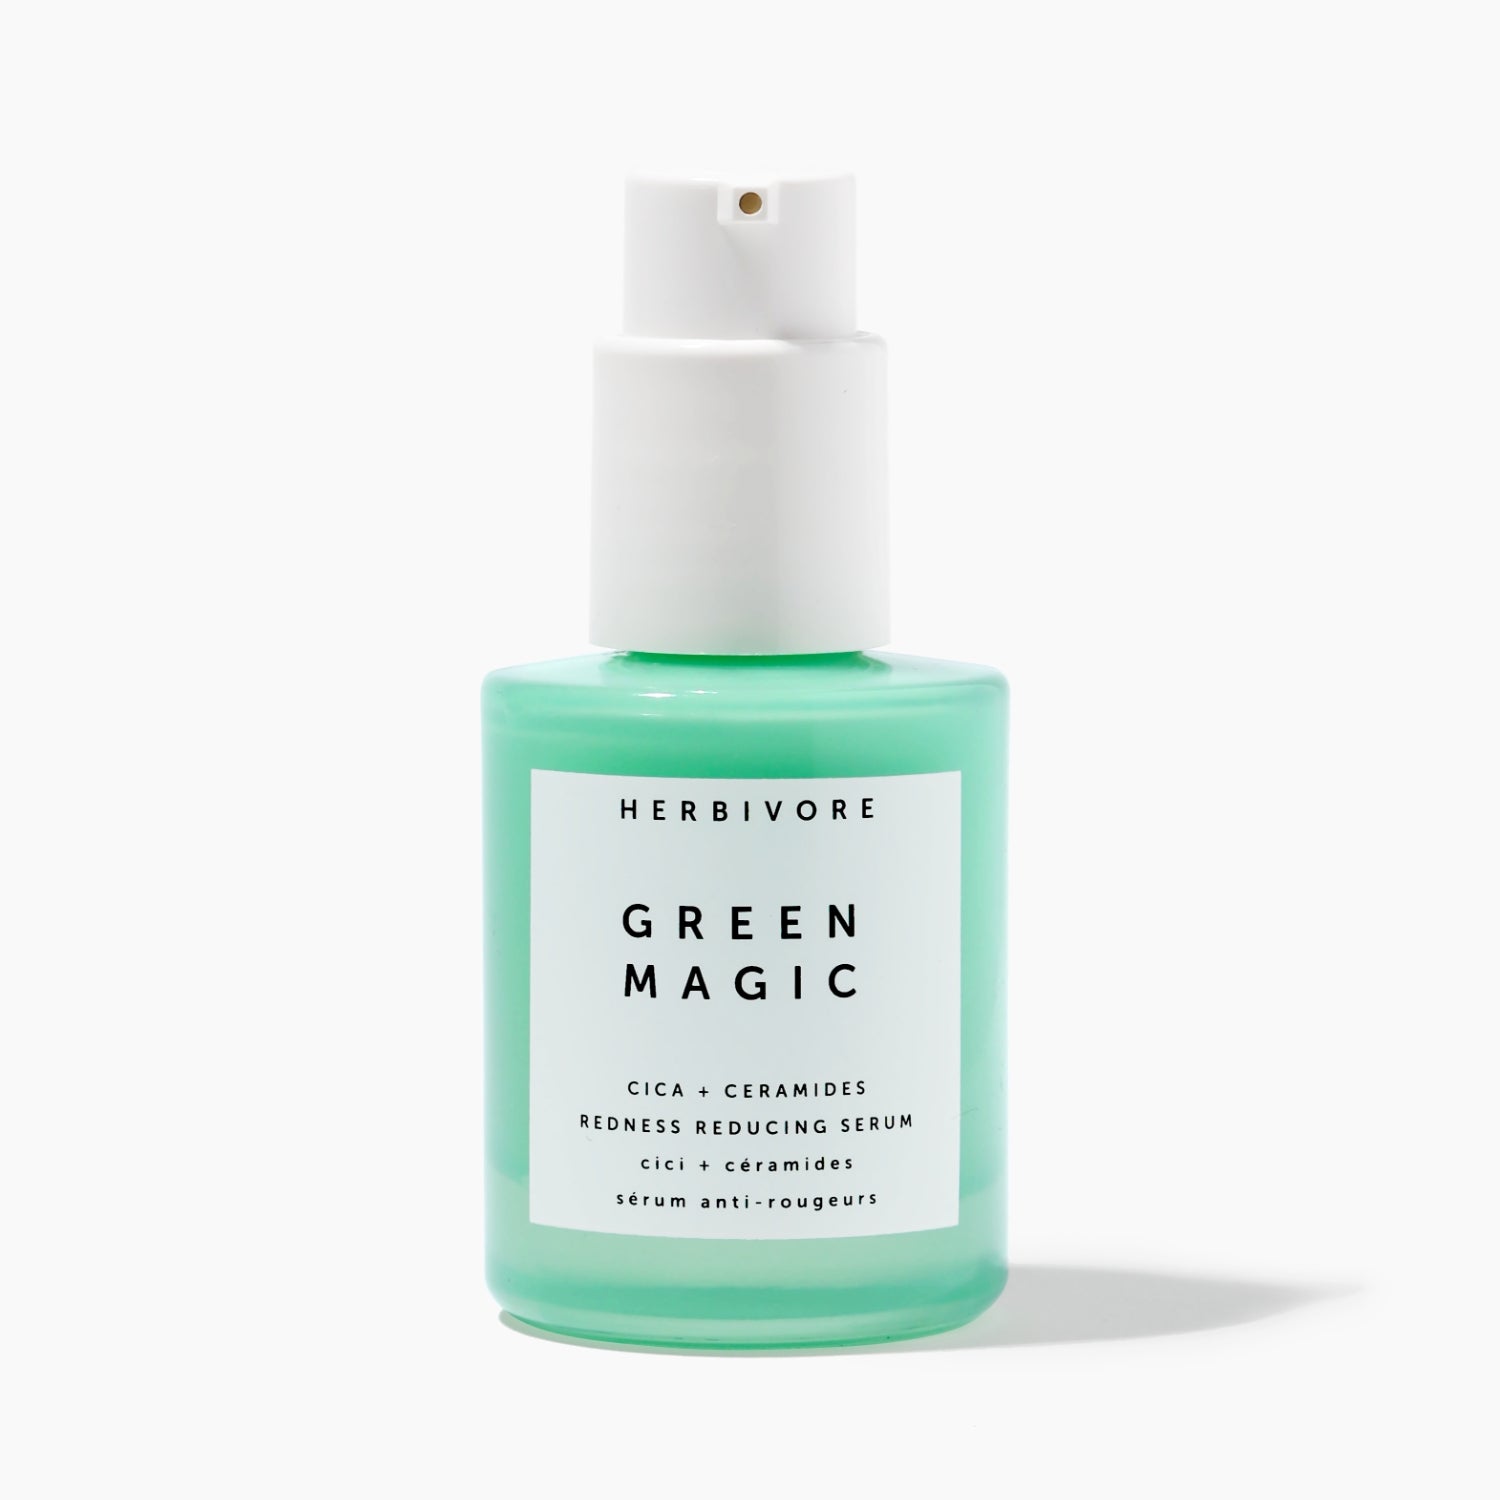 Bottle of Green Magic Redness Reducing Serum with shadow